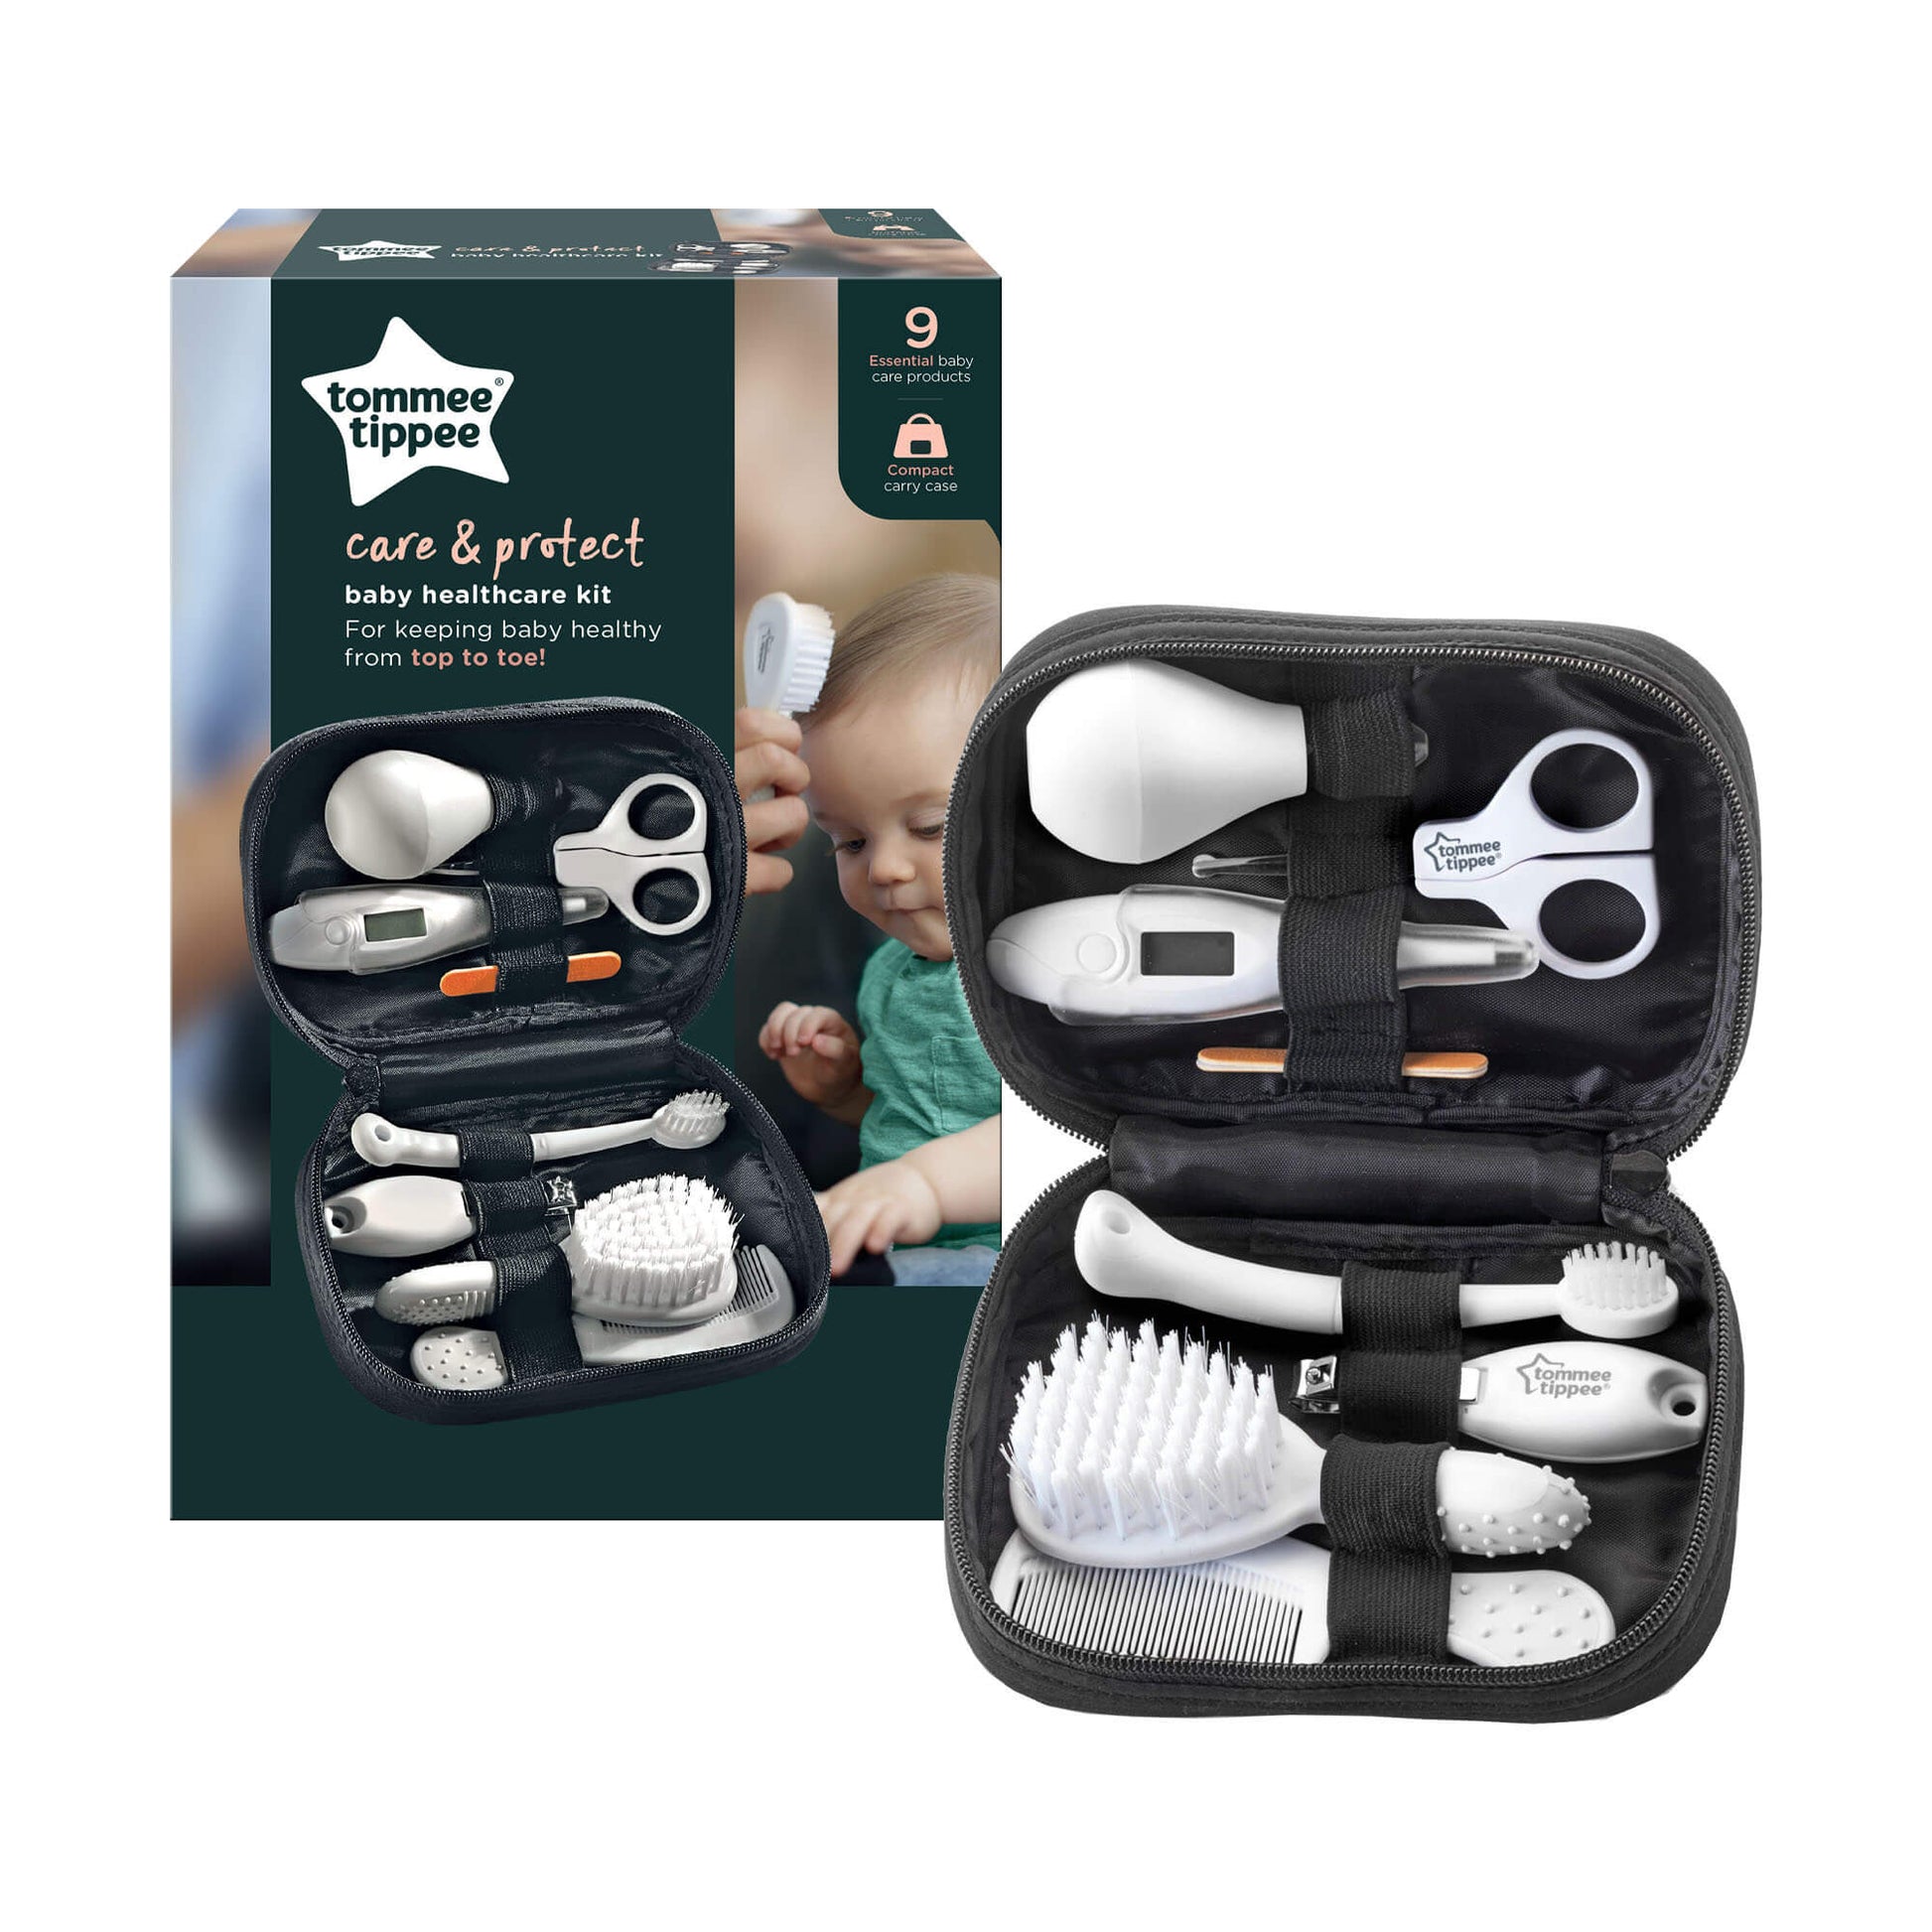 Tommee Tippee Health Care Kit available at Bear & Moo